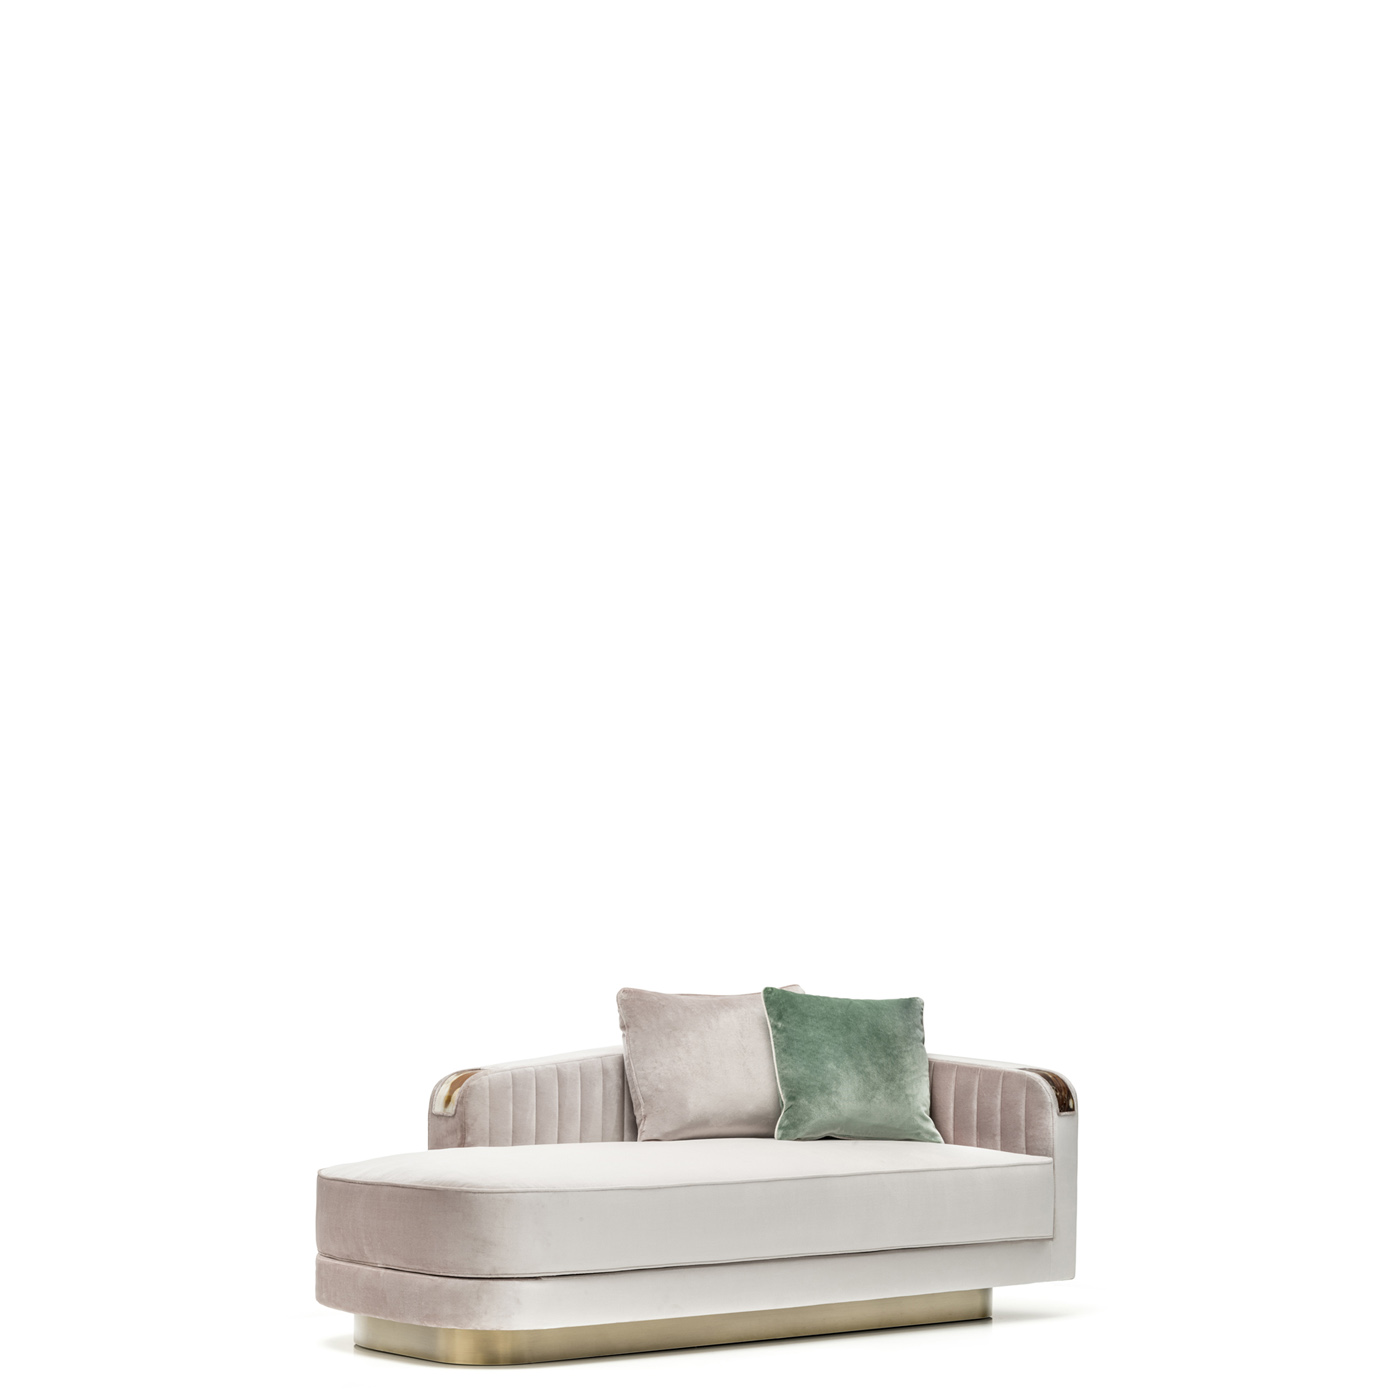 Sofas and seats - Rea chaise longue in Splendido velvet with horn armrests mod. 7023A - Arcahorn